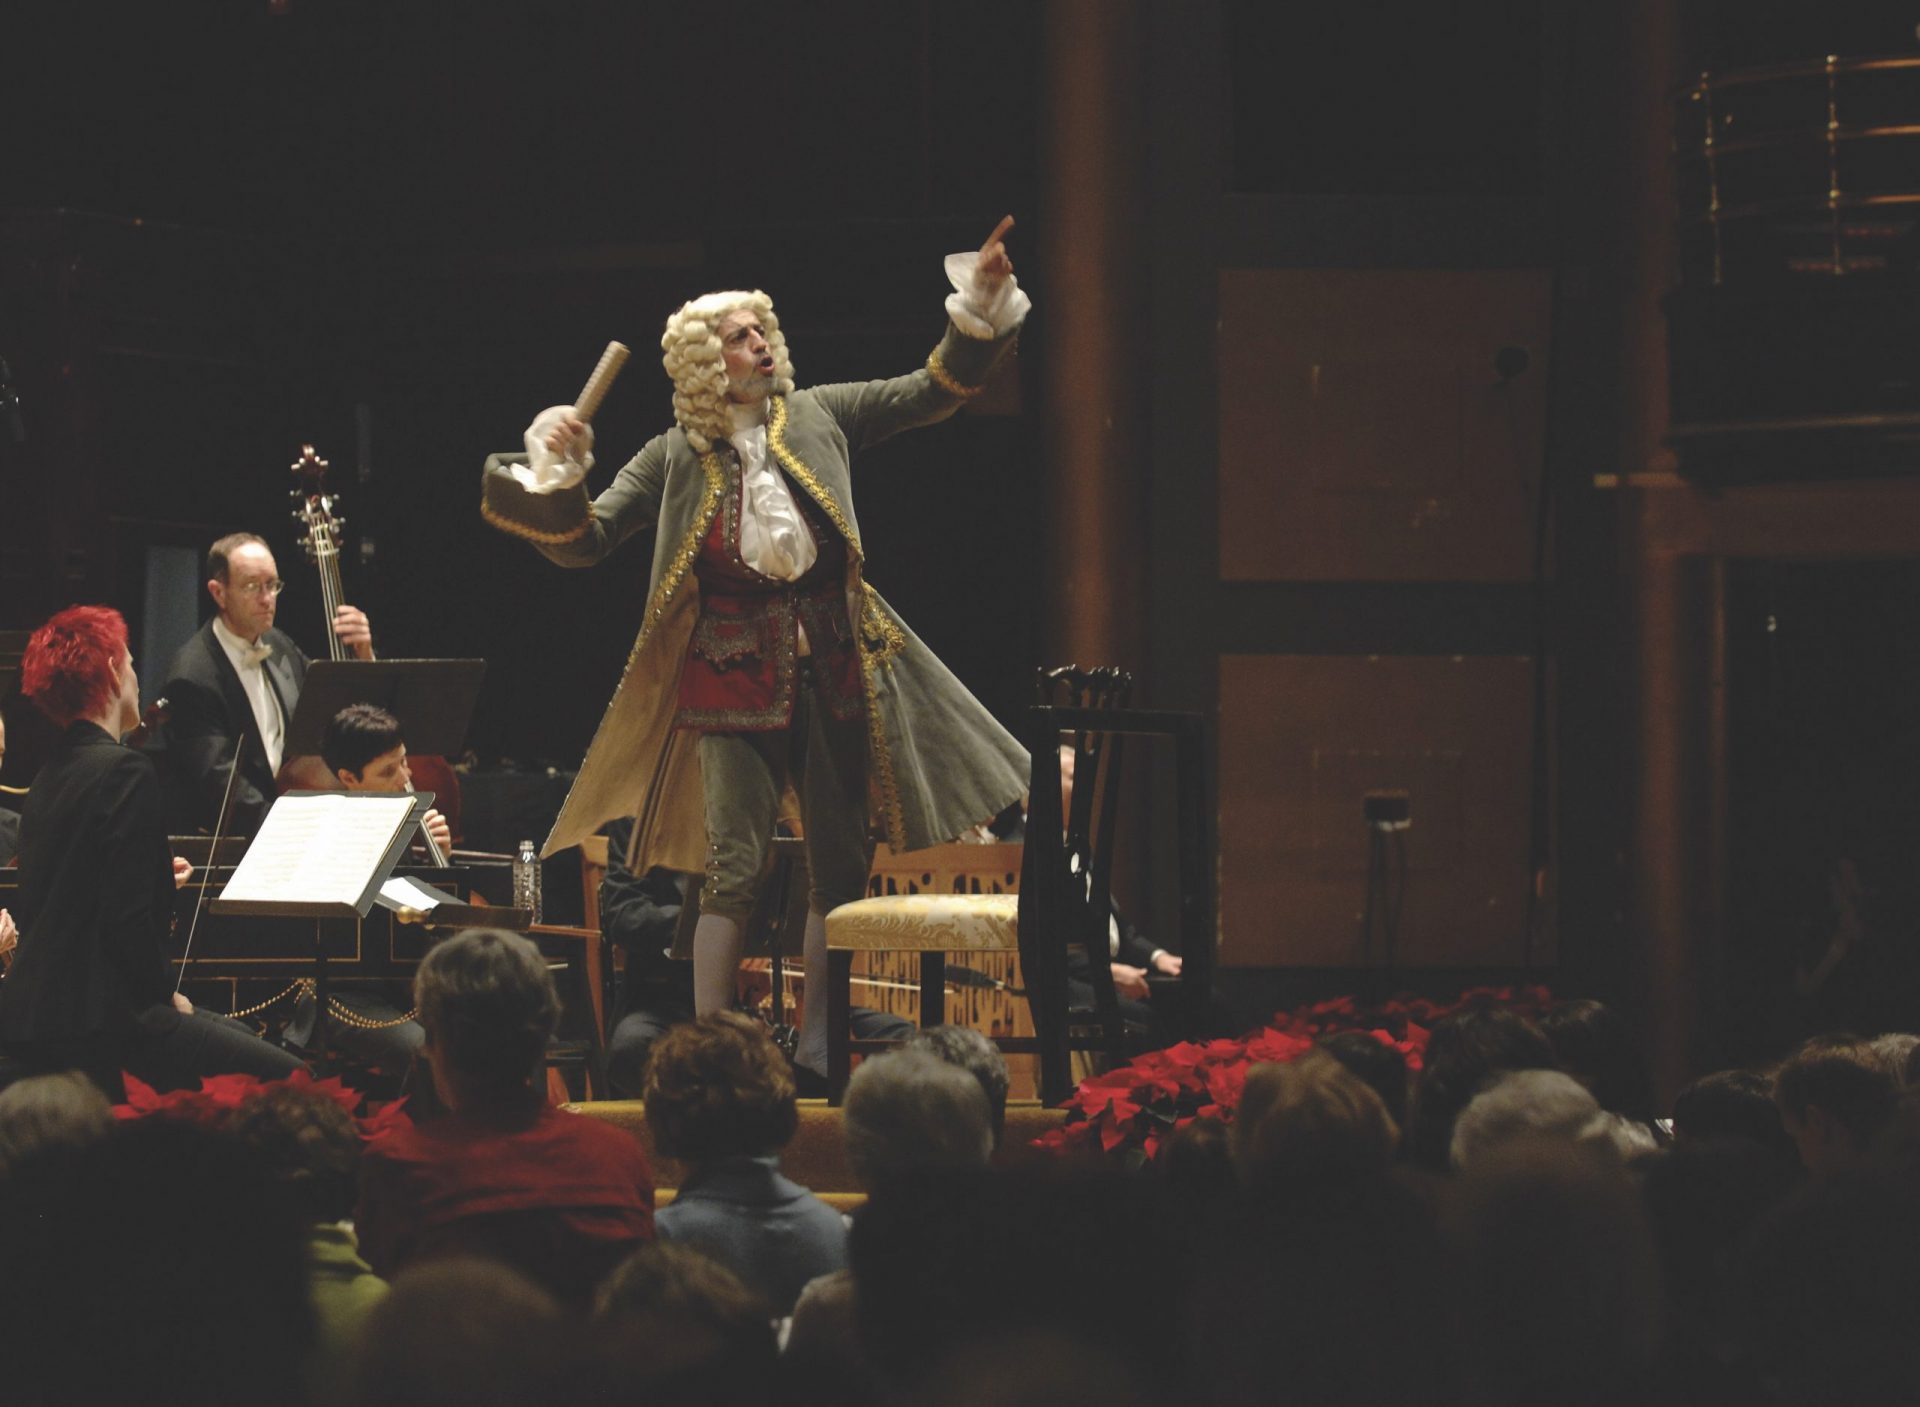 man dressed as Handel conducts